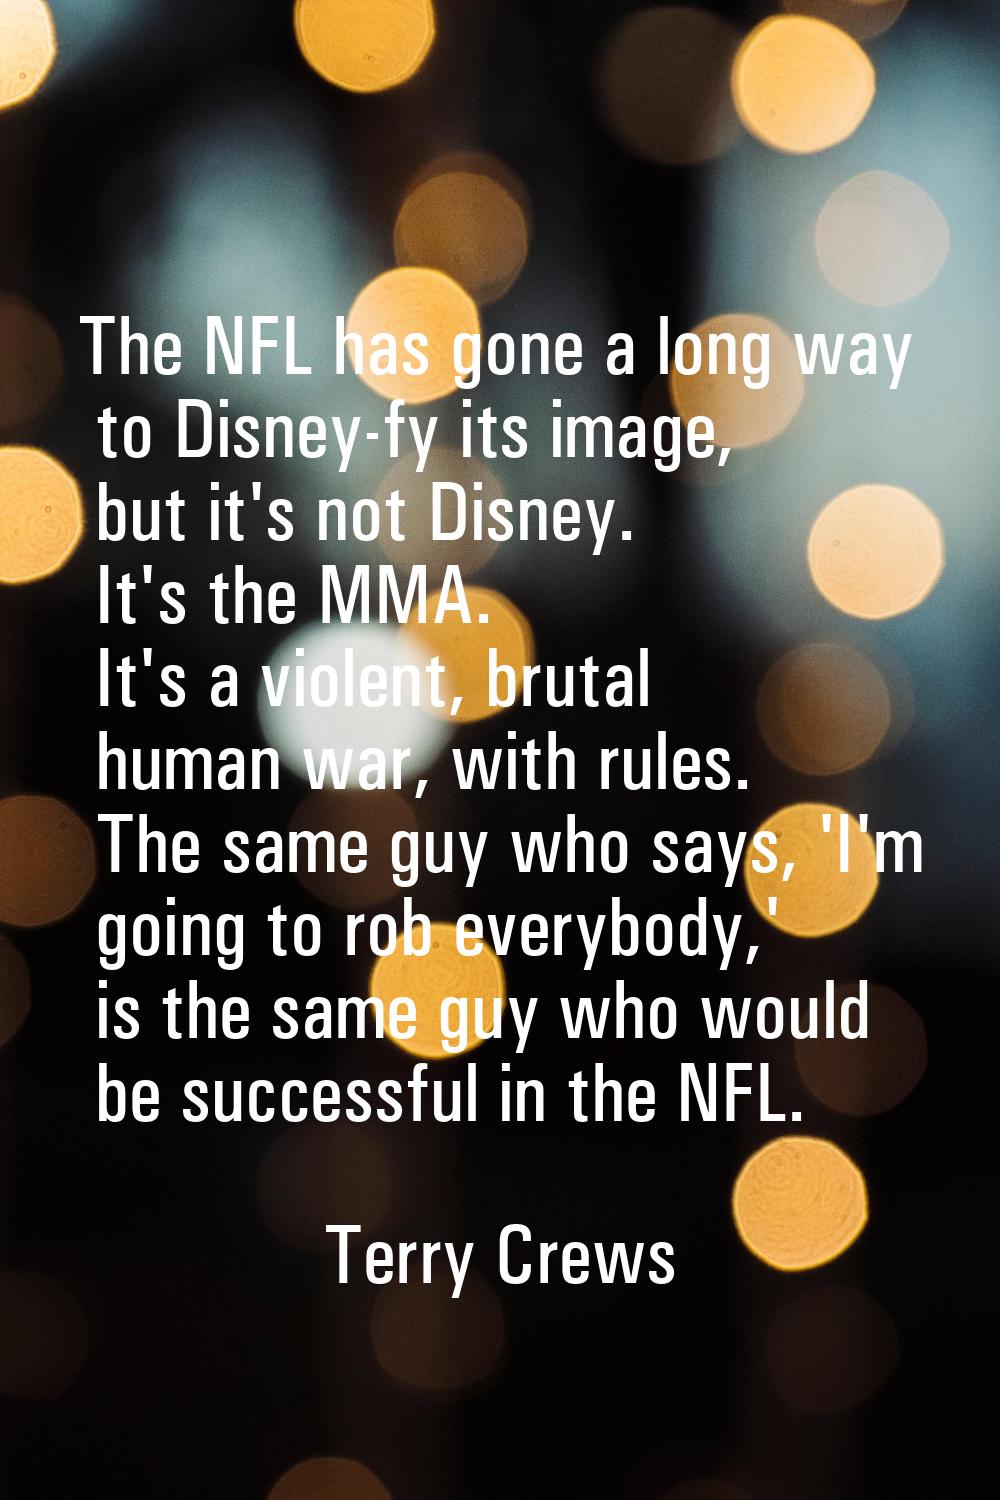 The NFL has gone a long way to Disney-fy its image, but it's not Disney. It's the MMA. It's a viole